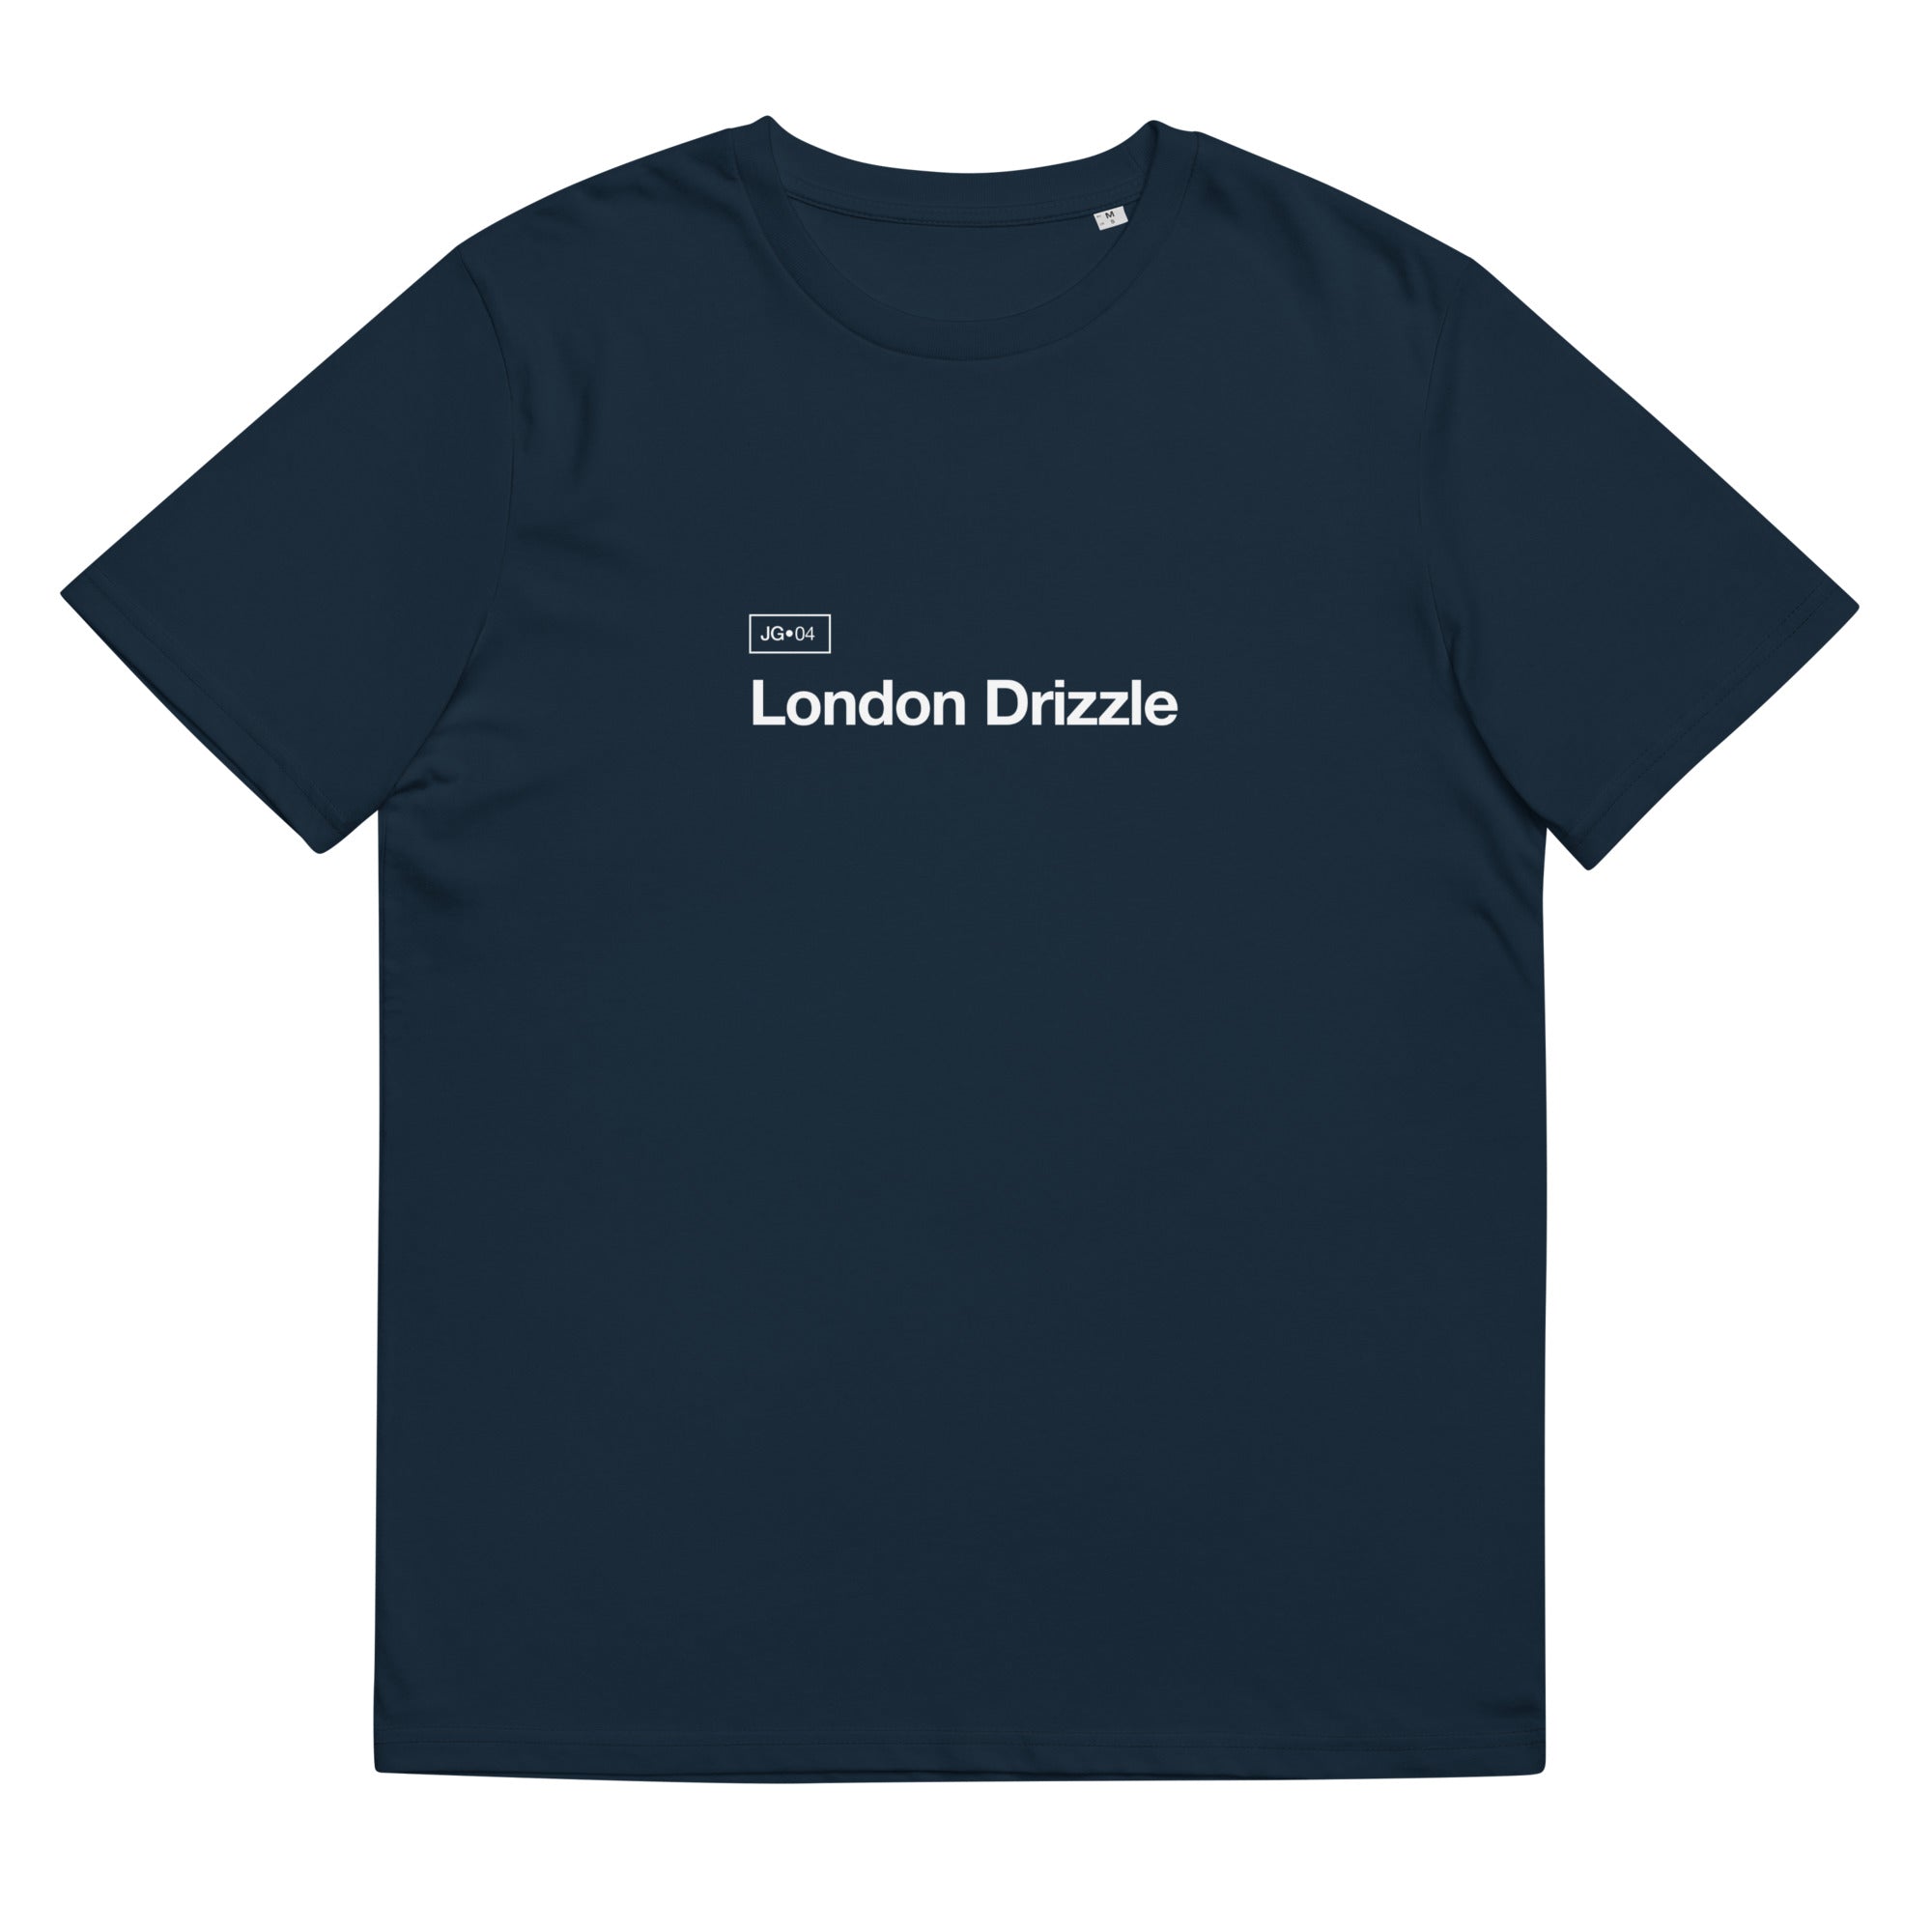 The London Drizzle Tee